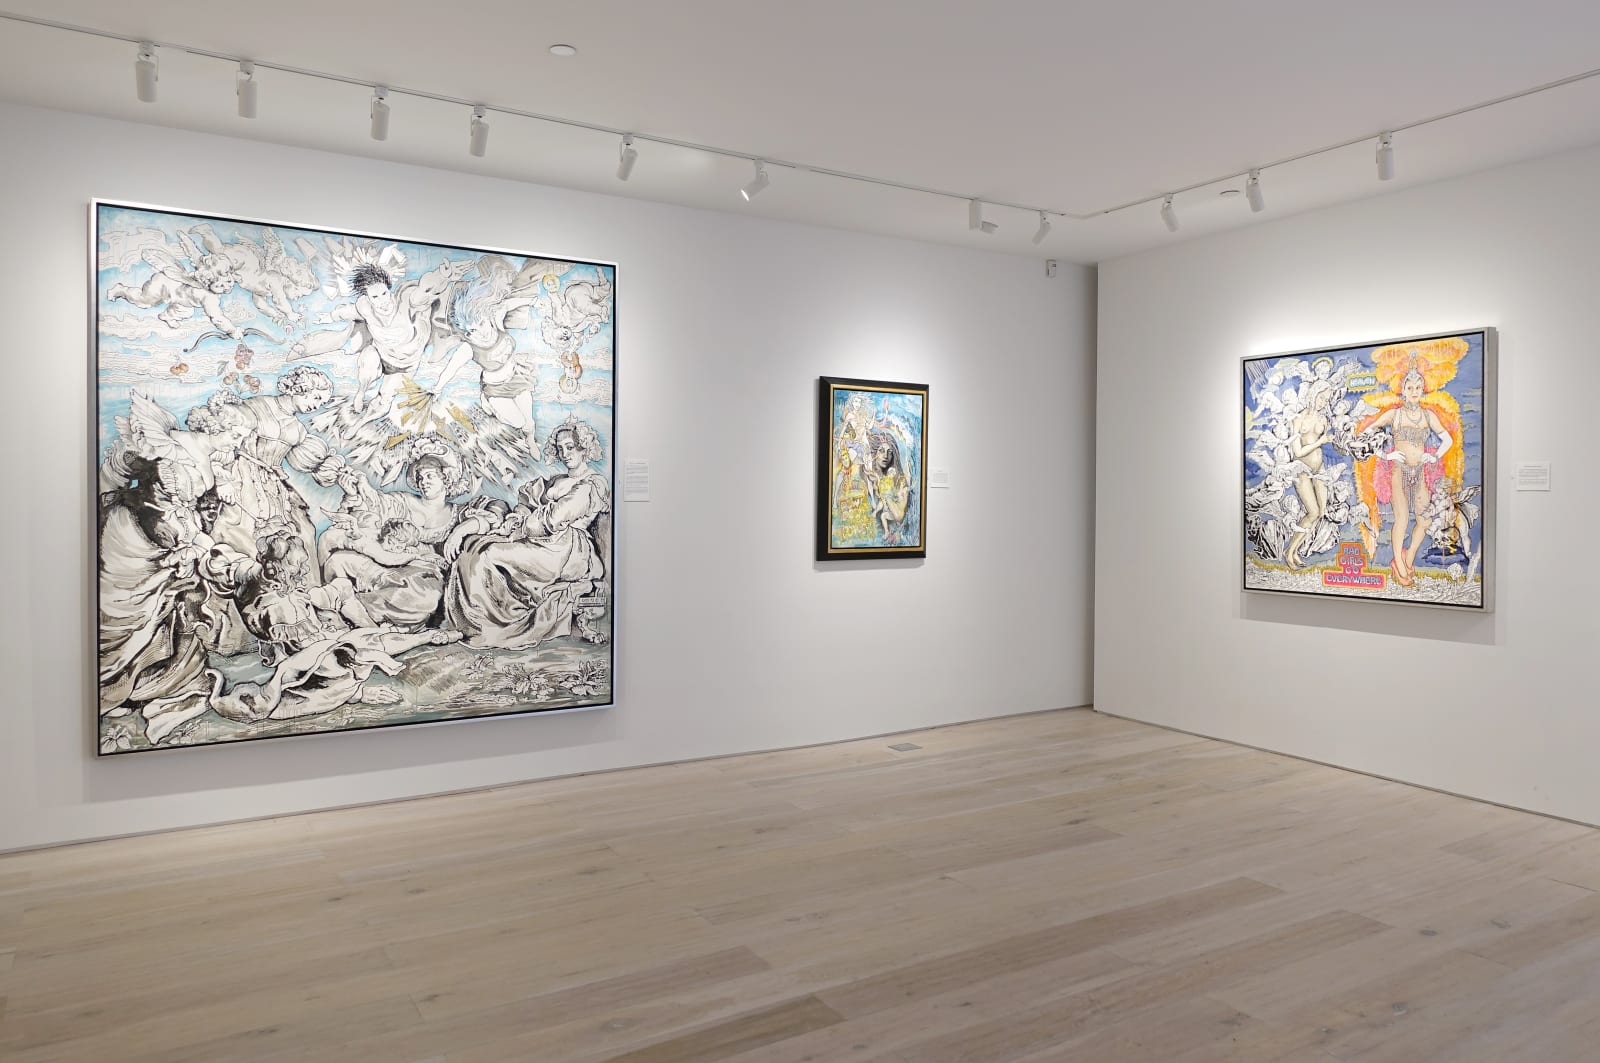 Installation view: Audrey Flack: Master Drawings from Crivelli to Pollock